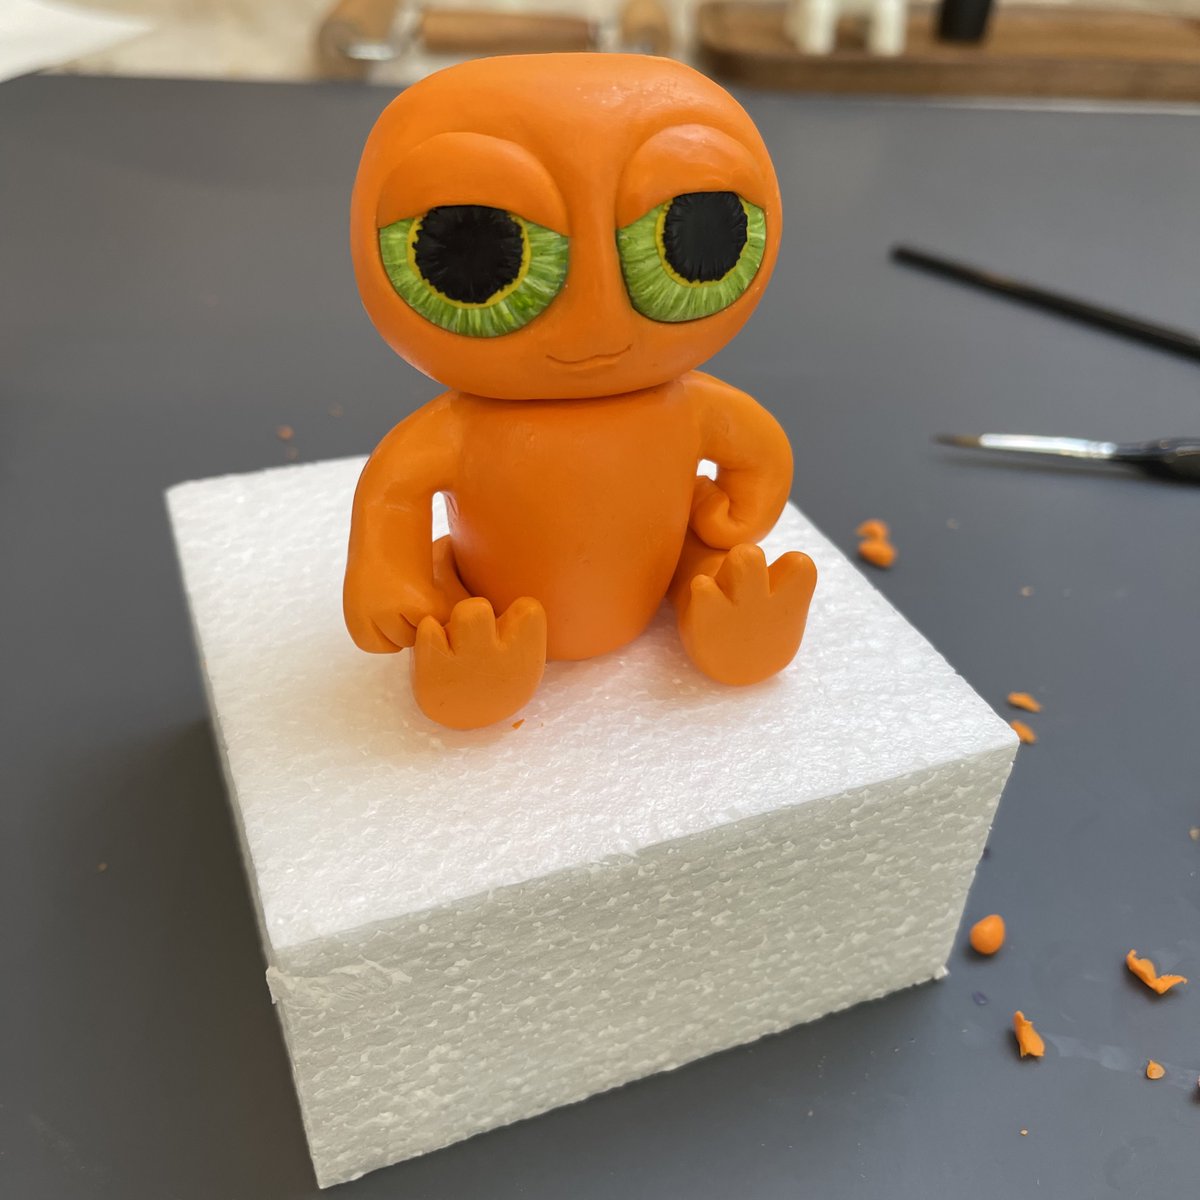 Wakey-wakey, chocolate lovers!

If you guessed @Imposters yesterday! then you guessed RIGHT!🥇🏆

Sure is the cutest alien I've ever seen and he's almost done! 🍫👽  @elliotrades  #chocolateart